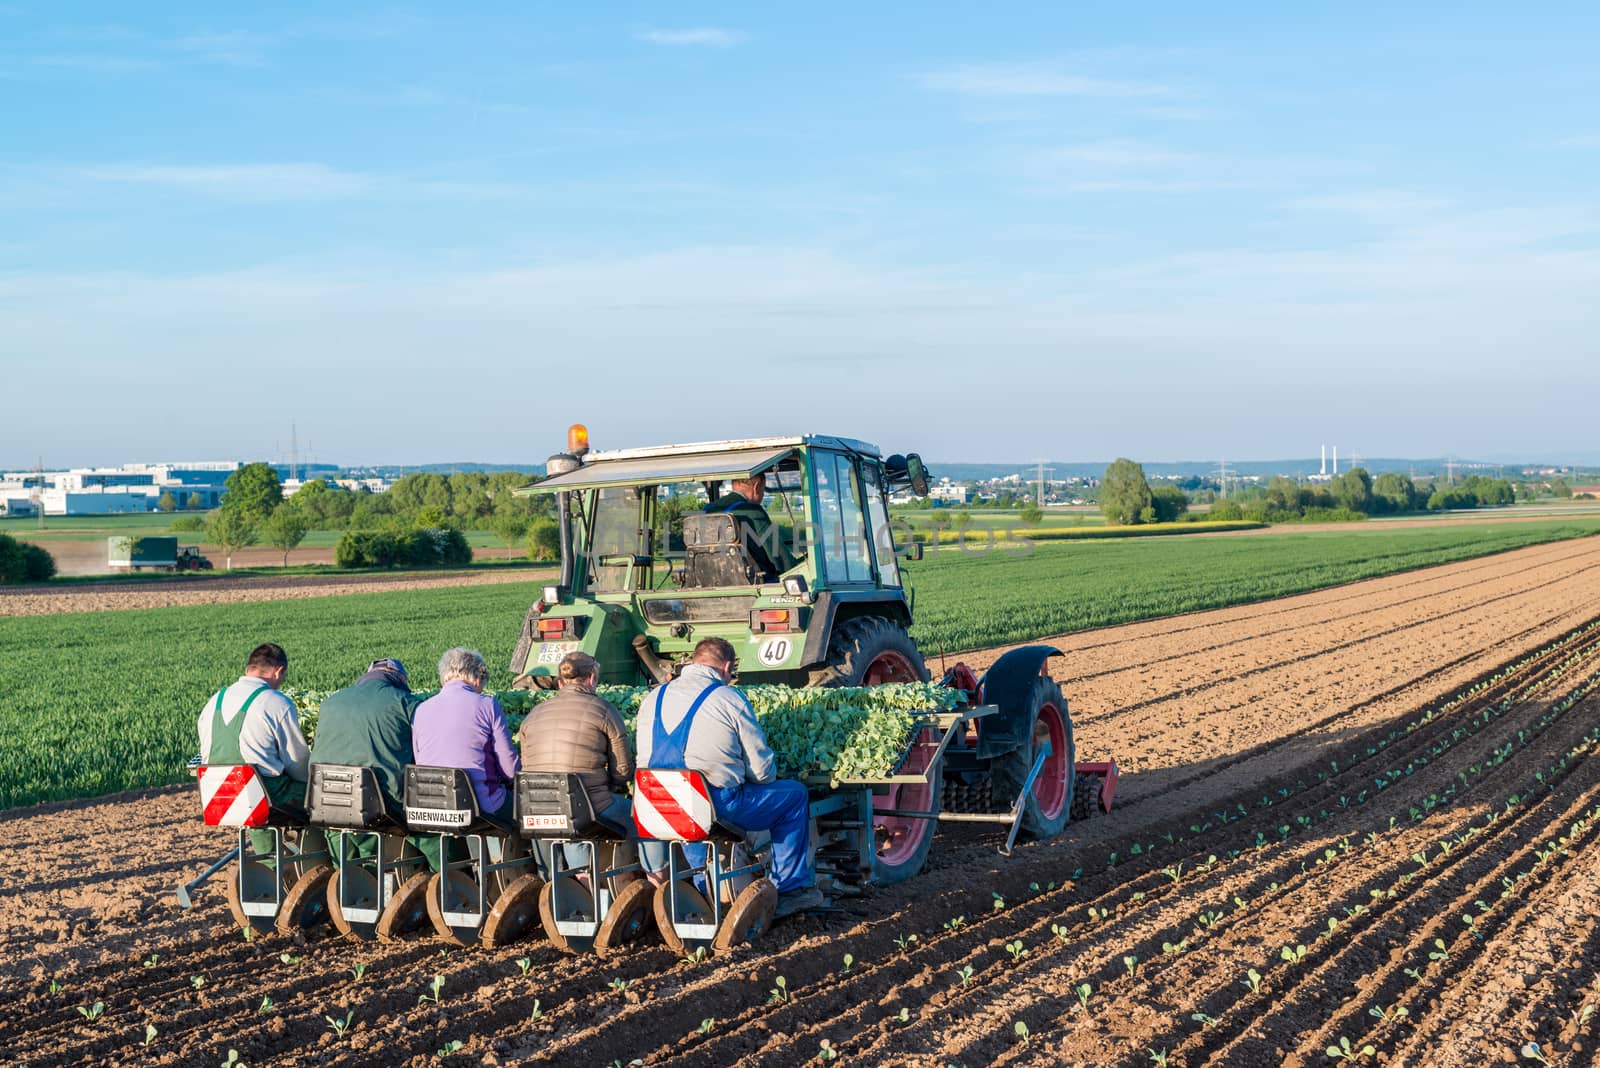 OSTFILDERN-SCHARNHAUSEN, GERMANY - MAY 5, 2014: Agriculture - seedlings of young salad stacked on a trailer with a tractor in the background, seeding those plants with several people feeding those into machinery at the back of the tractor on May, 5, 2014 in Ostfildern-Scharnhausen near Stuttgart, Germany.